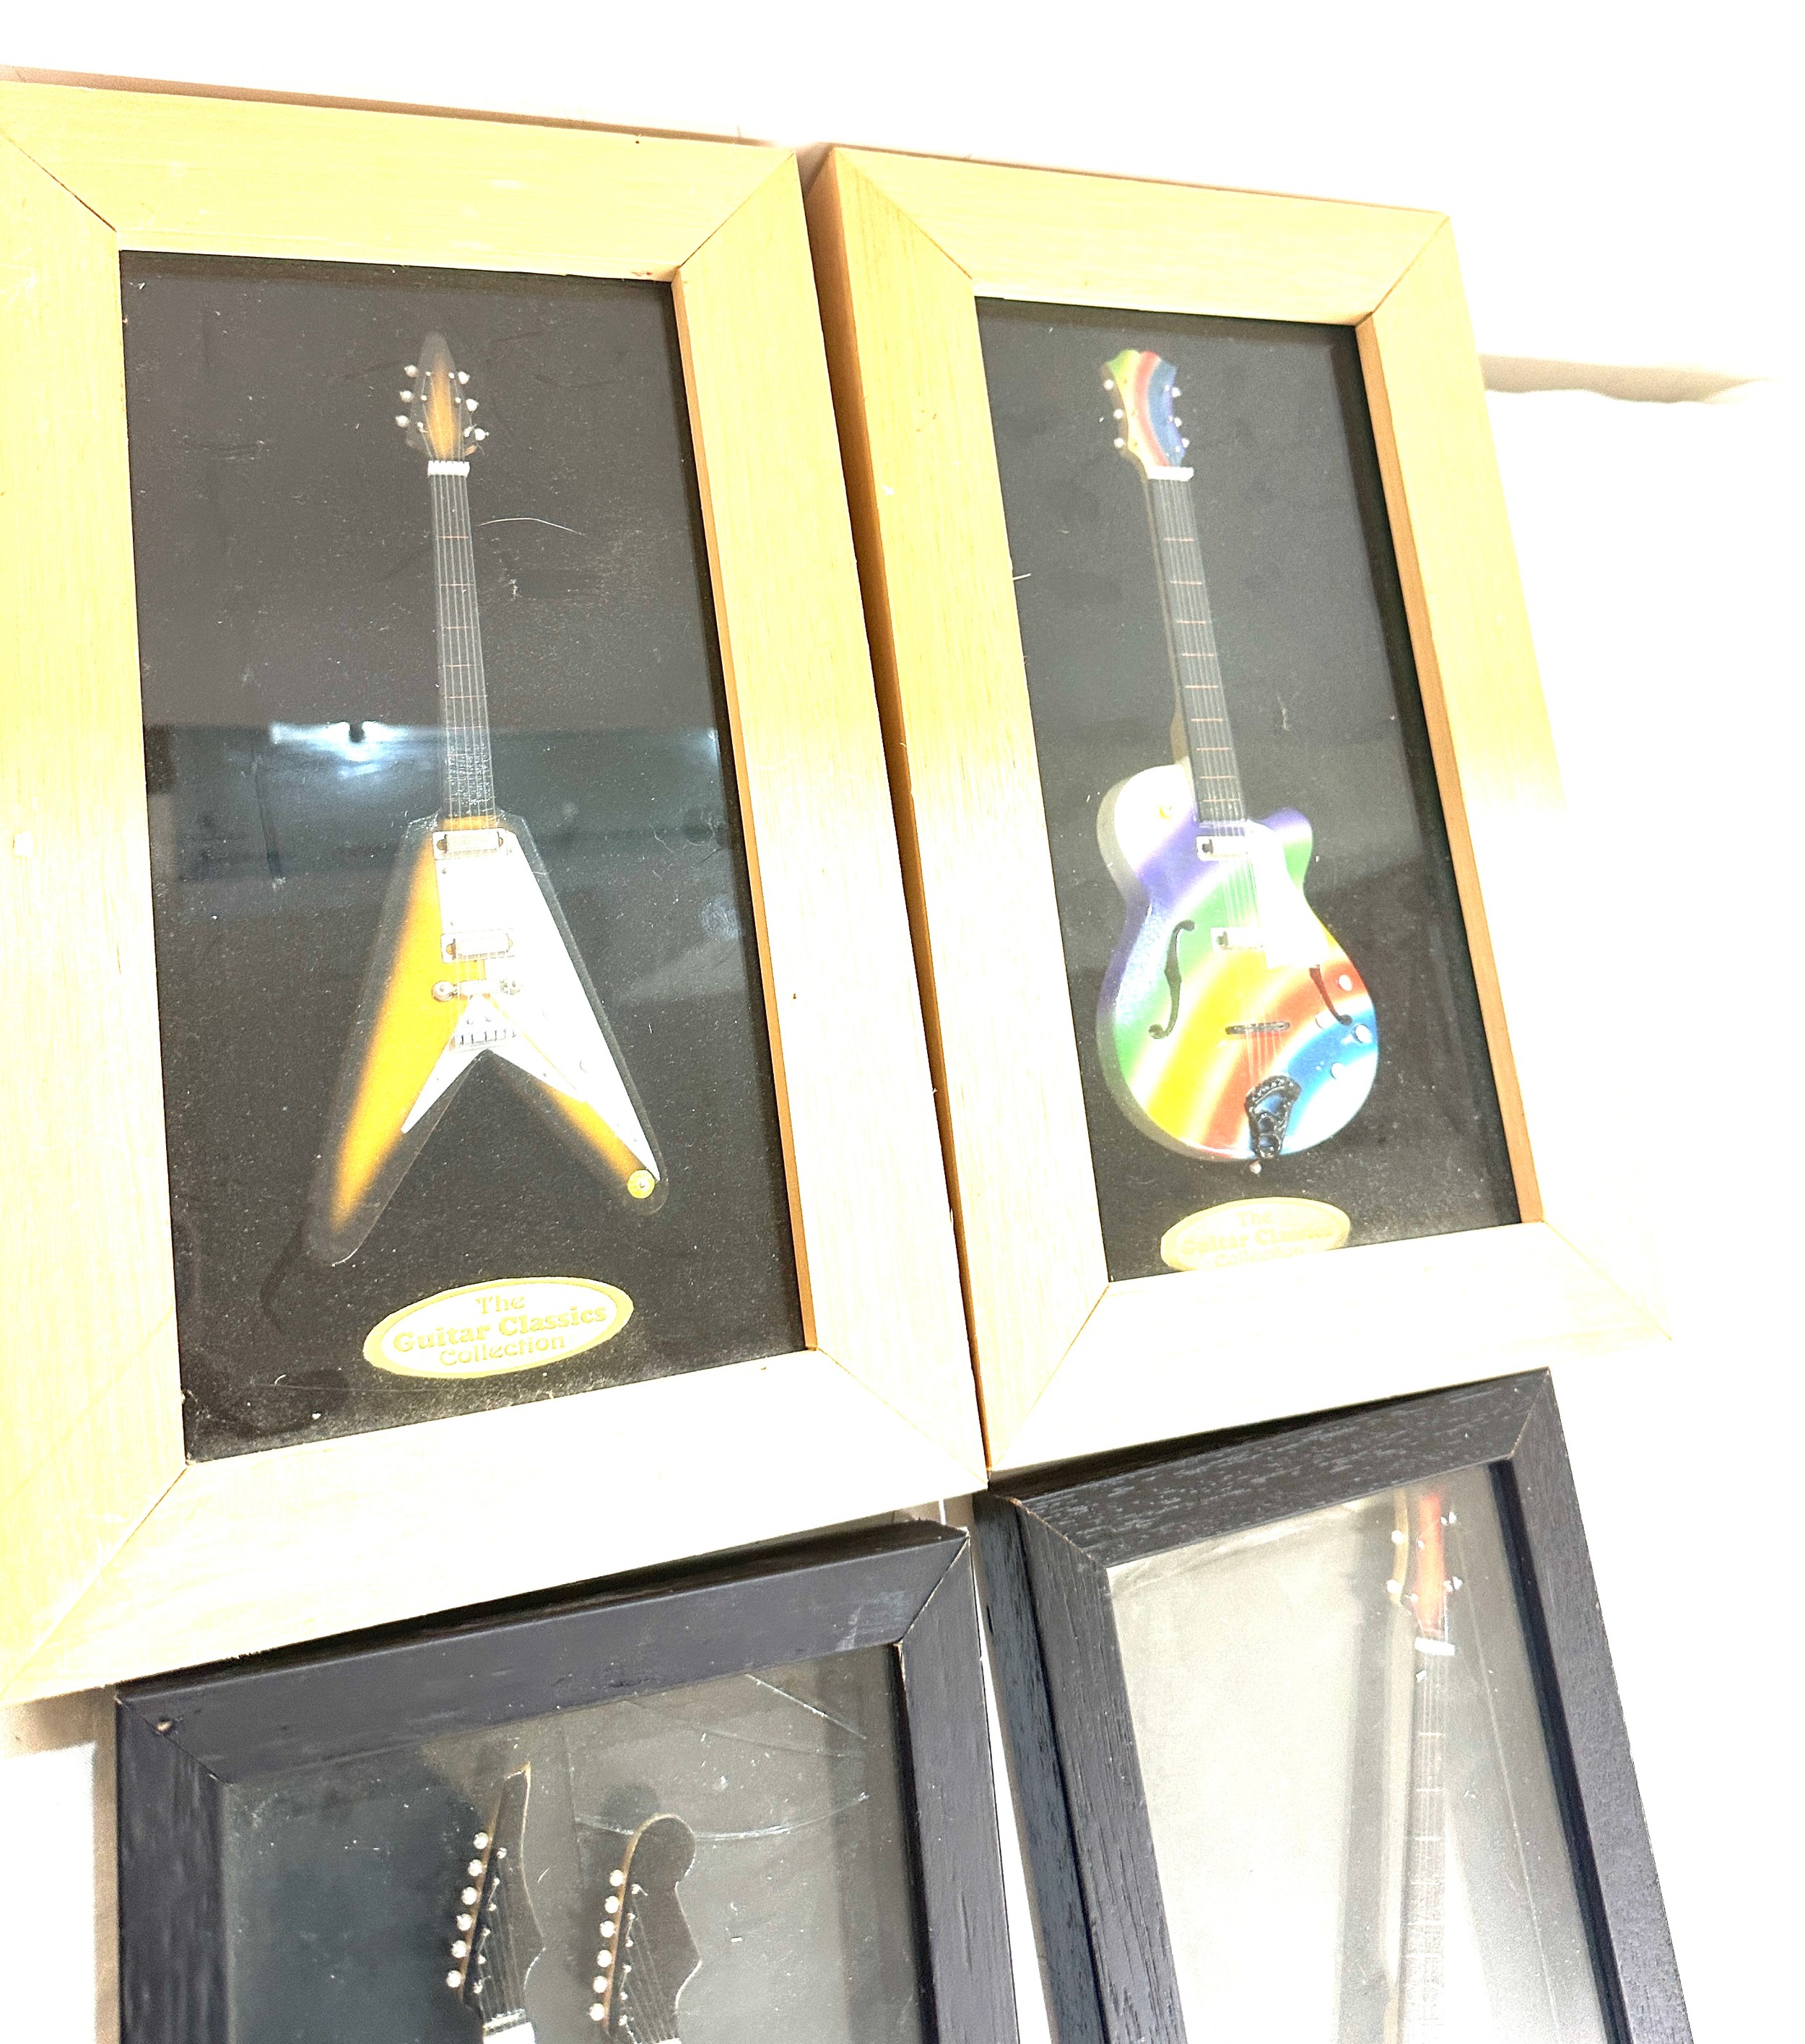 Four framed guitar models two from the Classic guitar collection tallest measures 14 inches - Image 2 of 4